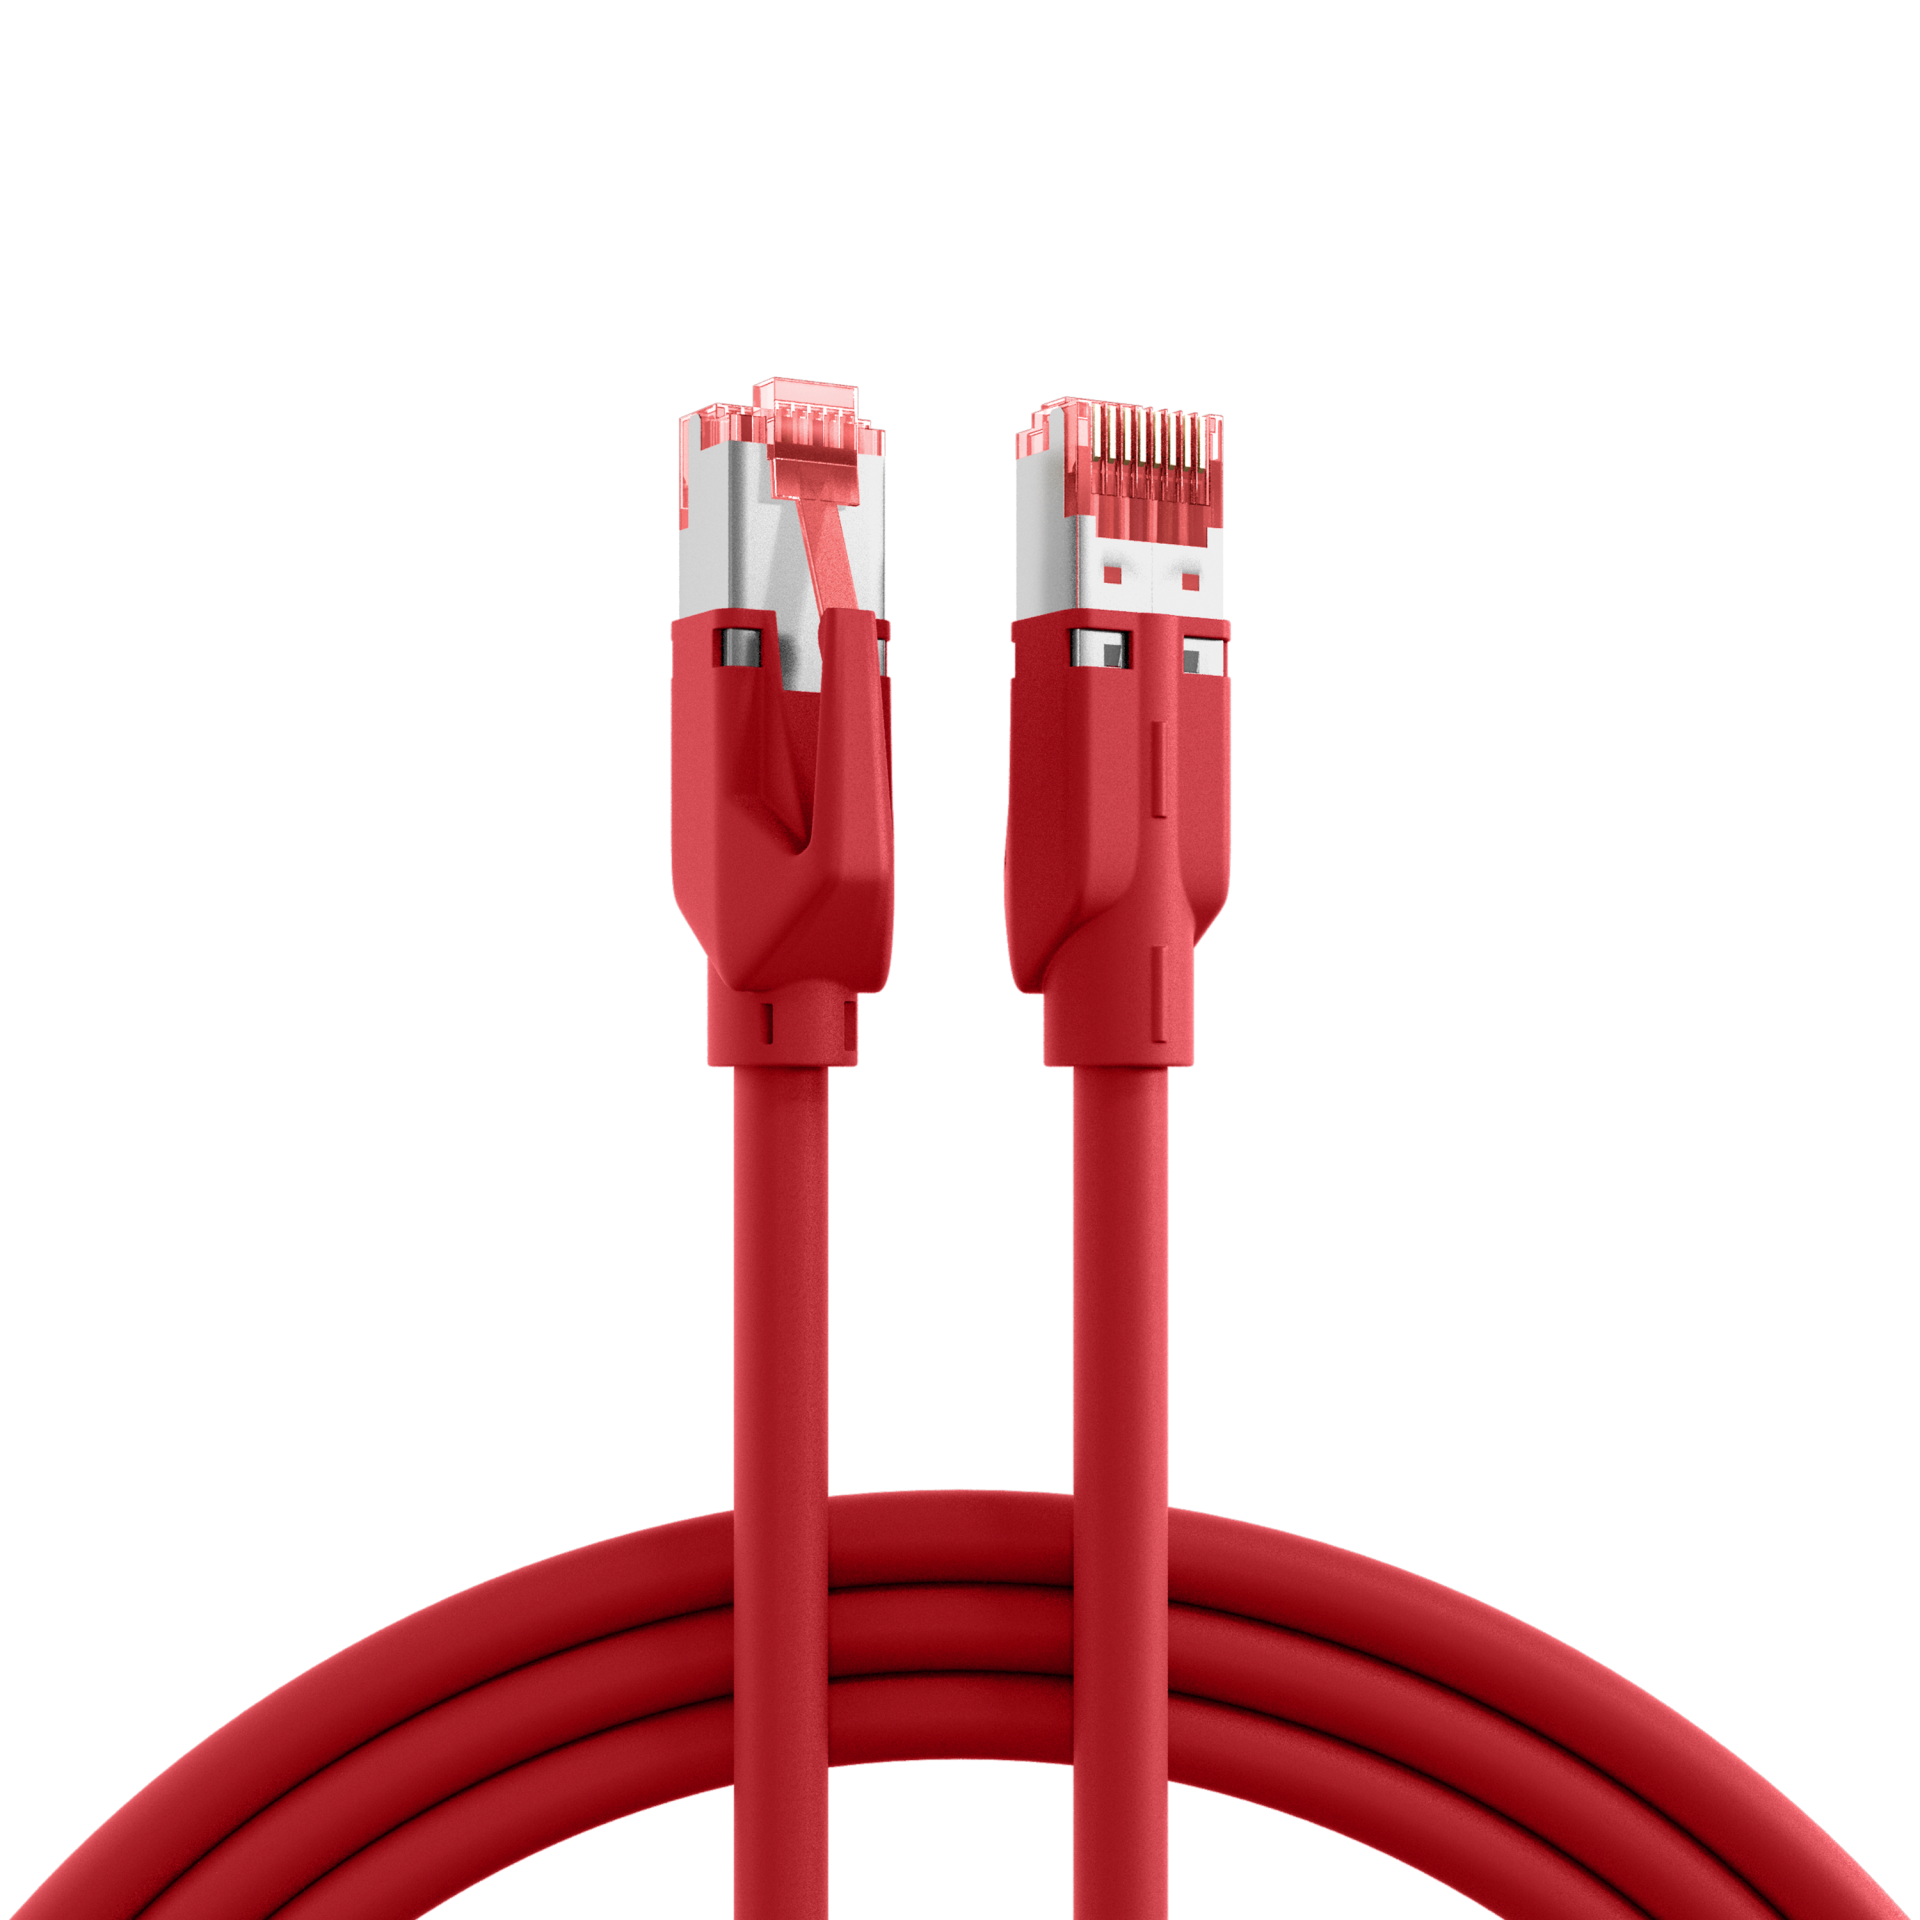 RJ45 Patch Cord Cat.6A S/FTP Dätwyler 7702 TM21 red 15m